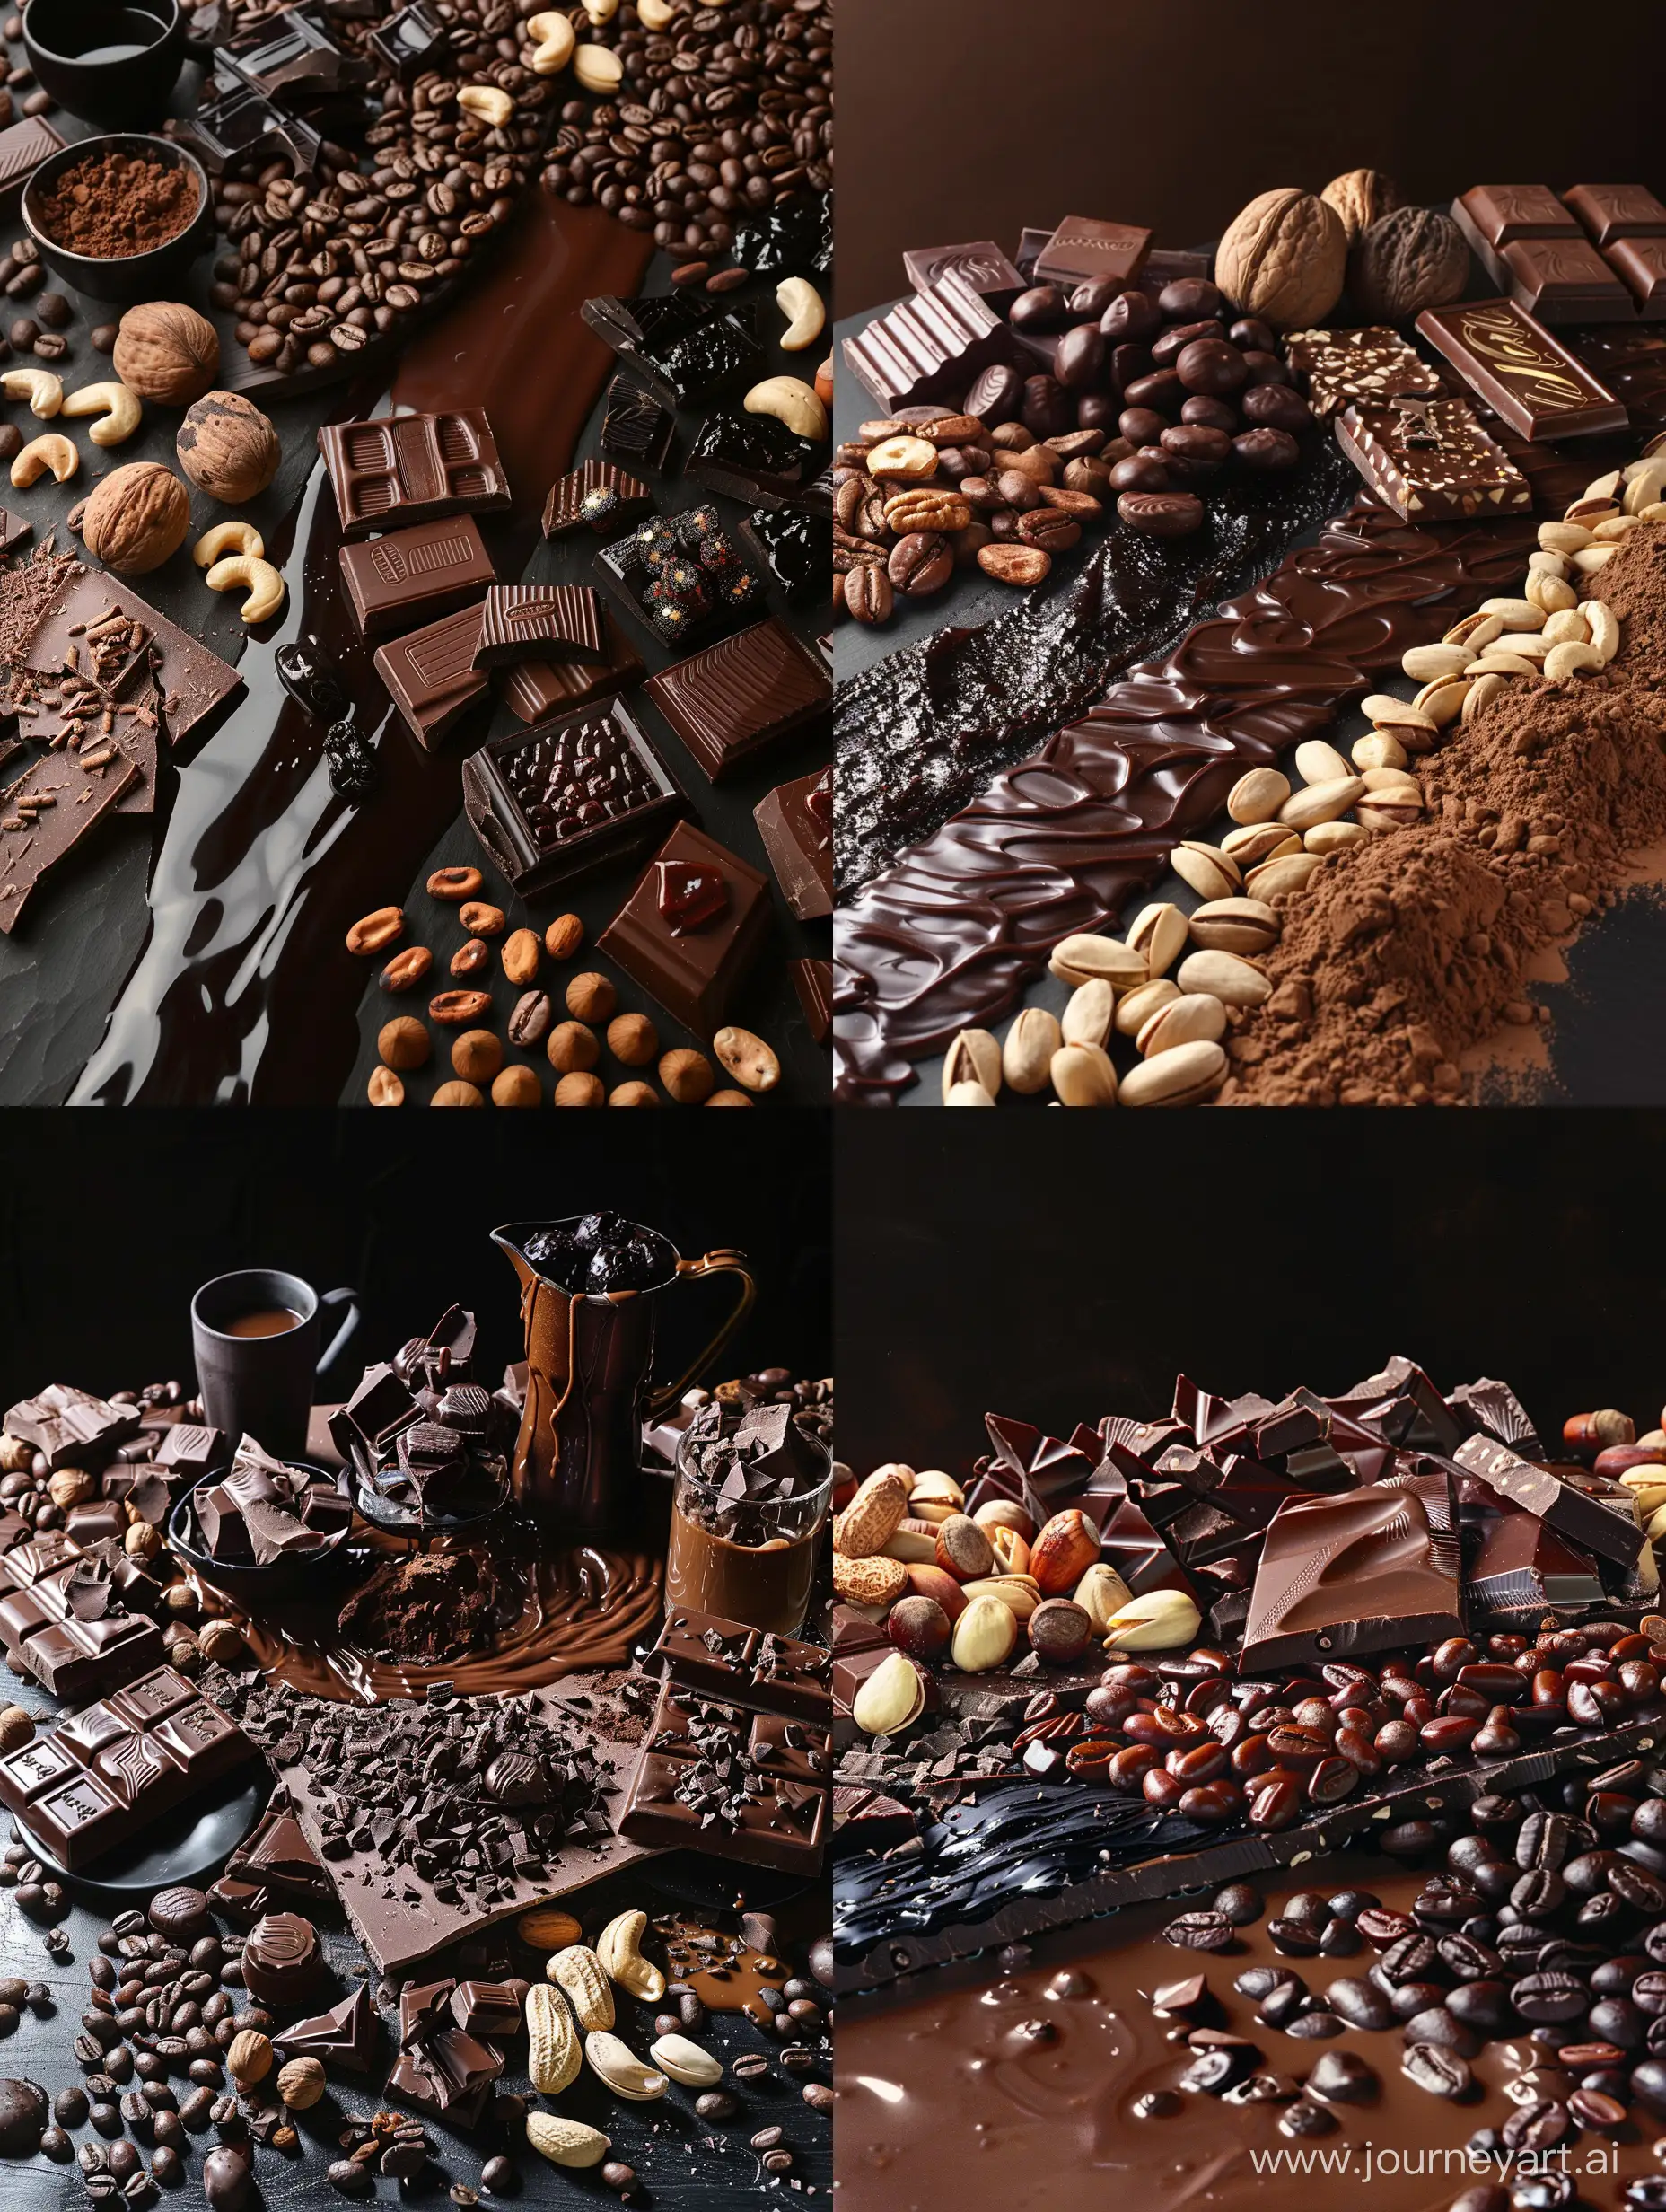 a table topped with assorted chocolates and nuts, chocolate, chocolate. intricate background, chocolate art, chocolate river, fully chocolate, celebration of coffee products, dark chocolate painting, ebony rococo, chocolate candy bar packaging, solid dark background, amazing food photography, chocolate sauce, black and brown colors, some chocolate sauce, sitting on a mocha-colored table, fuji choko,24k